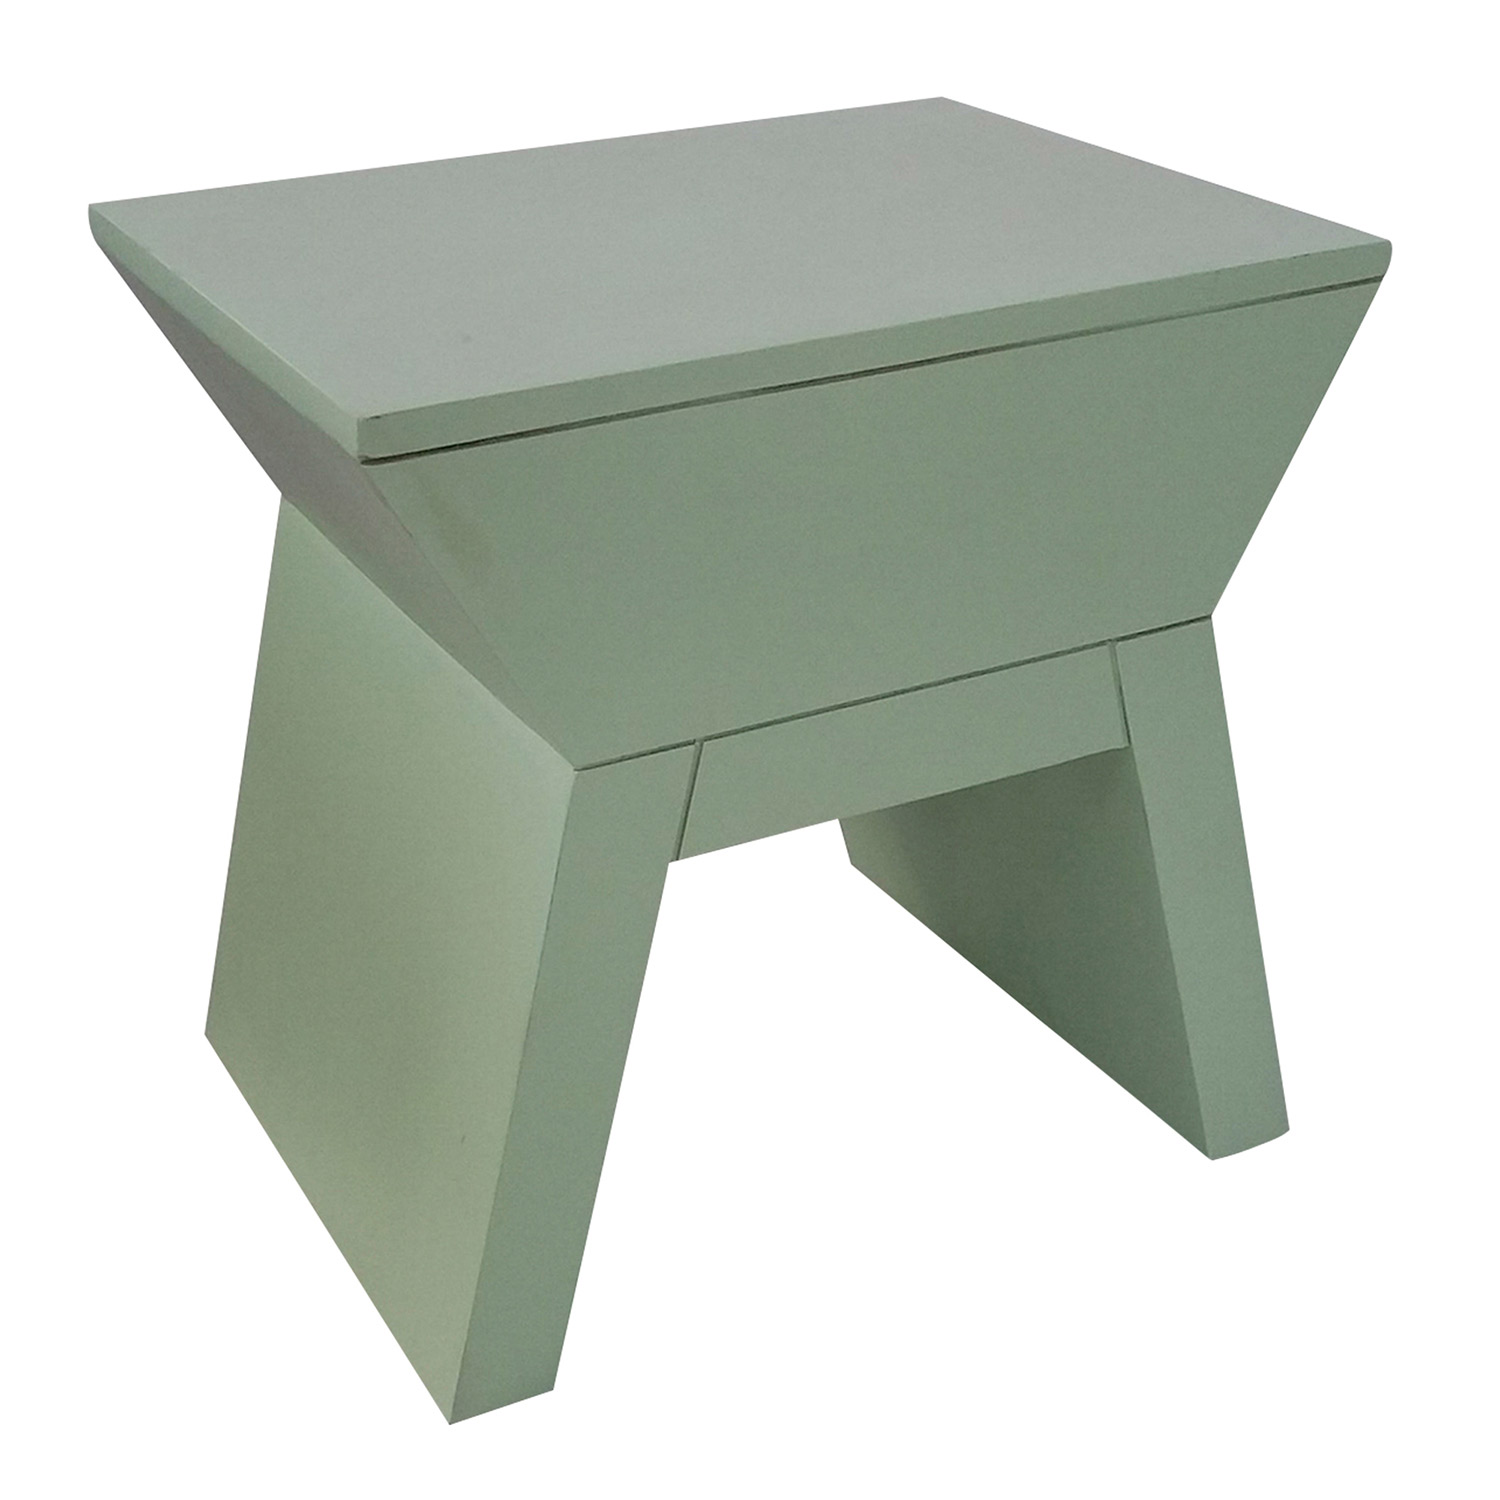 Ren-Wil PistachioHickory Stool - Mint